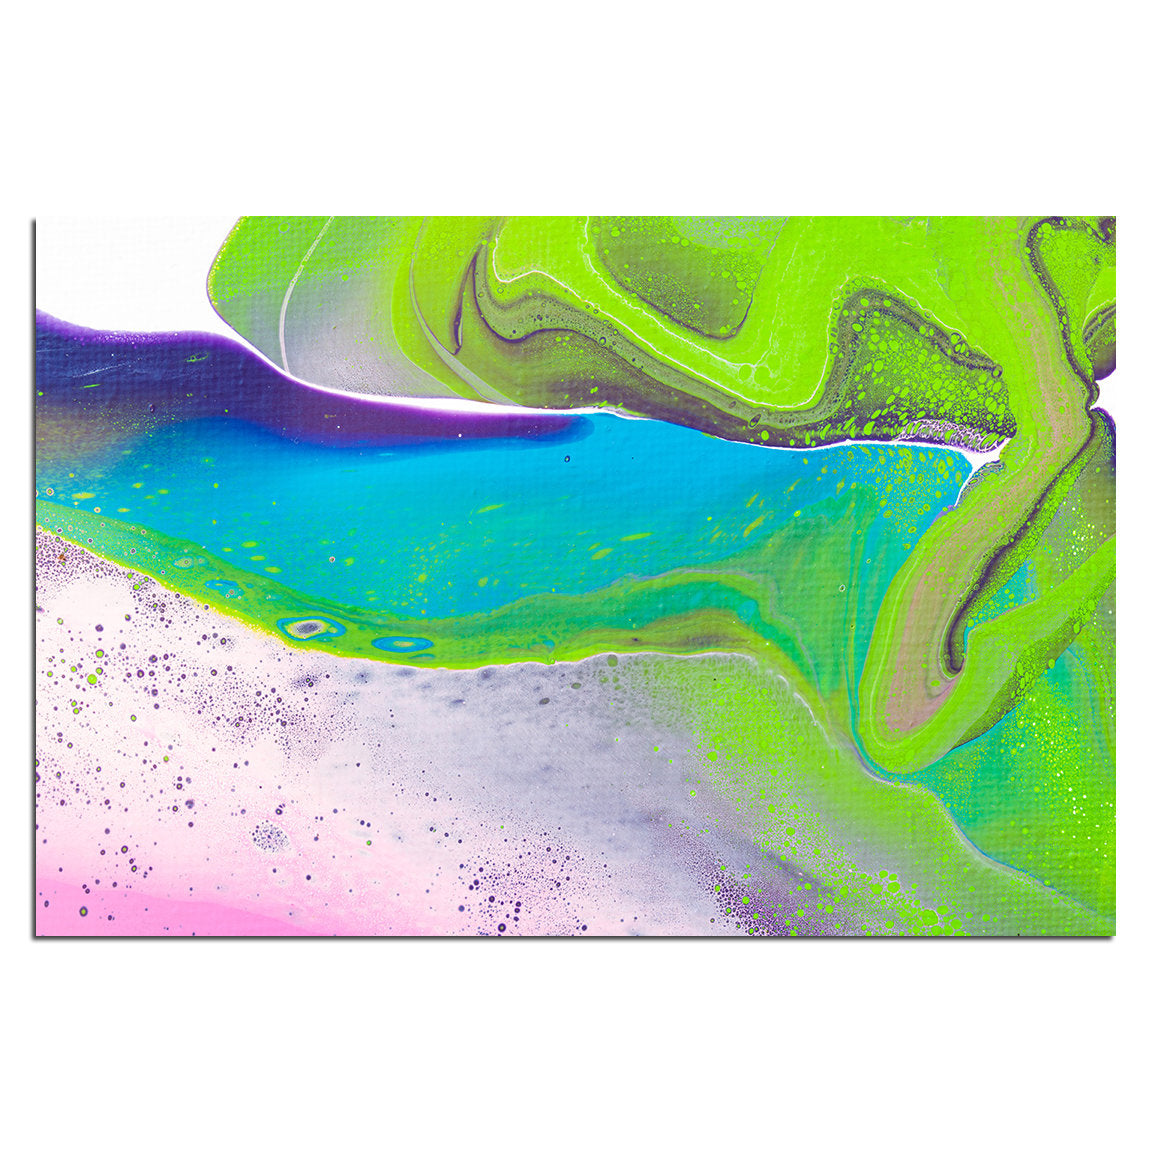 Removable Wall Mural - Wallpaper  Abstract Artwork - Fluid Art Pour 31  - PIPAFINEART